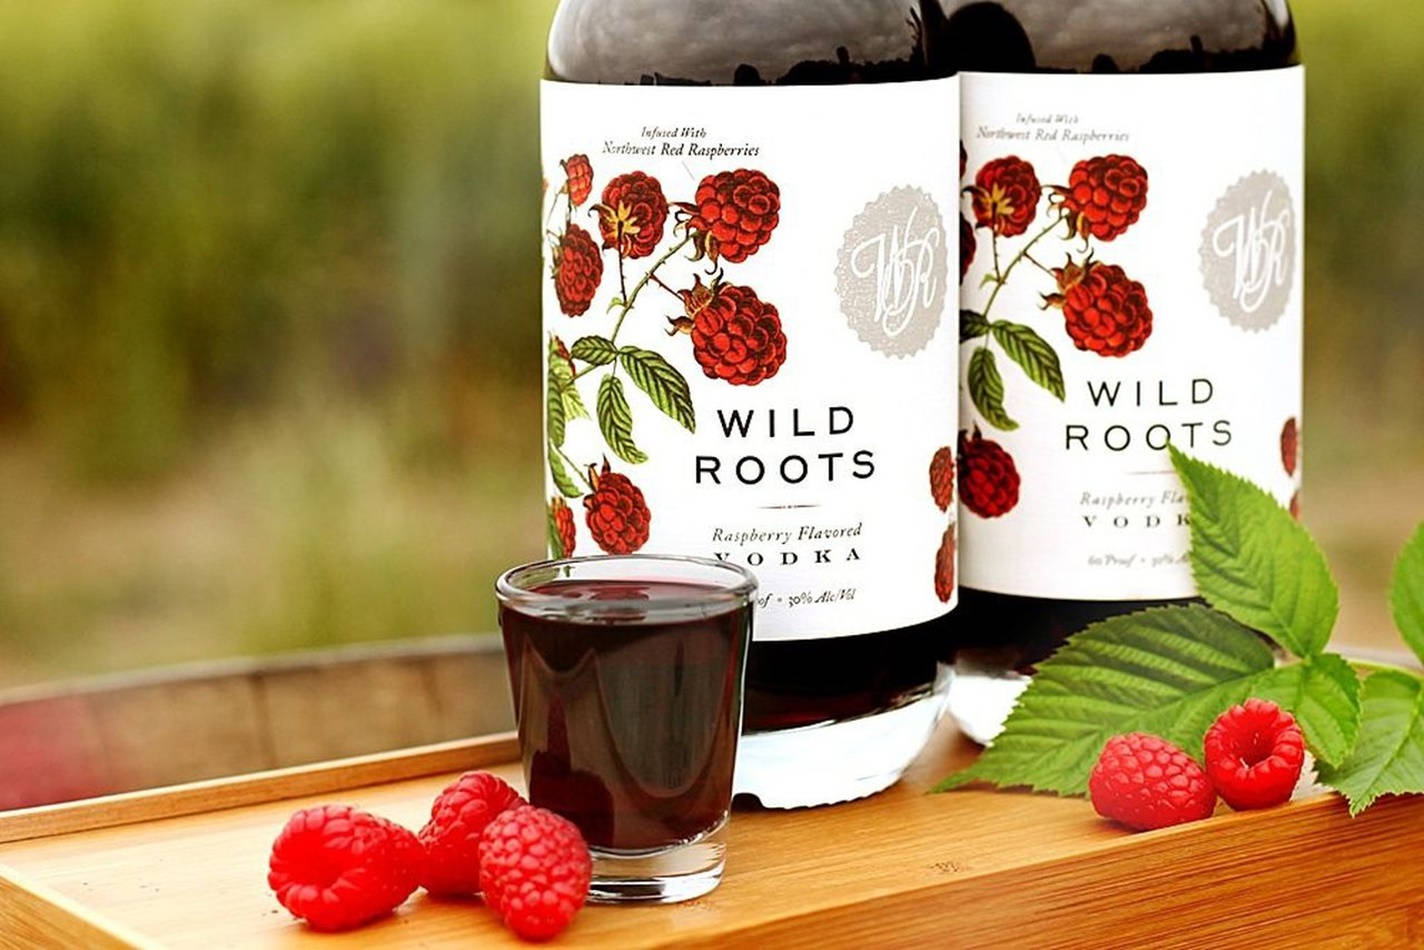 Two Wild Roots Raspberry Infused Vodka Wallpaper